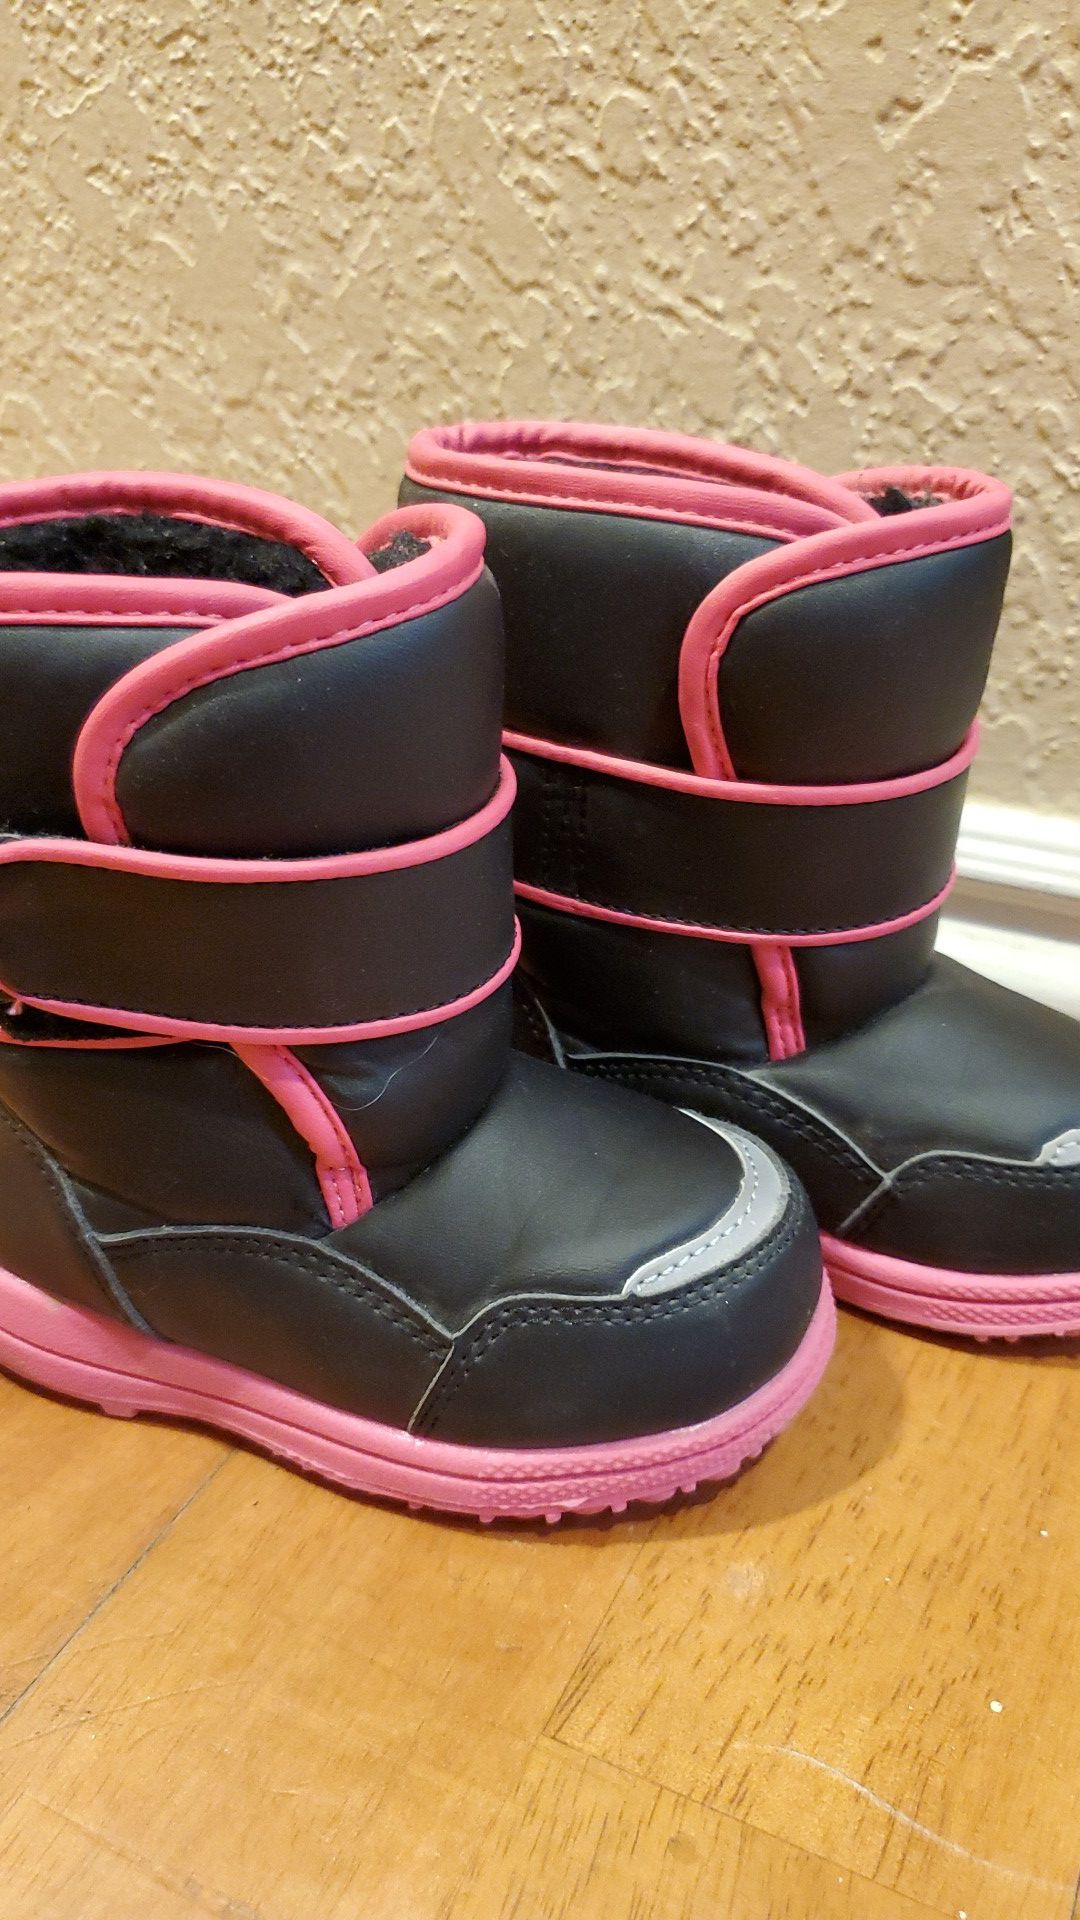 New toddler girl warm snow boots